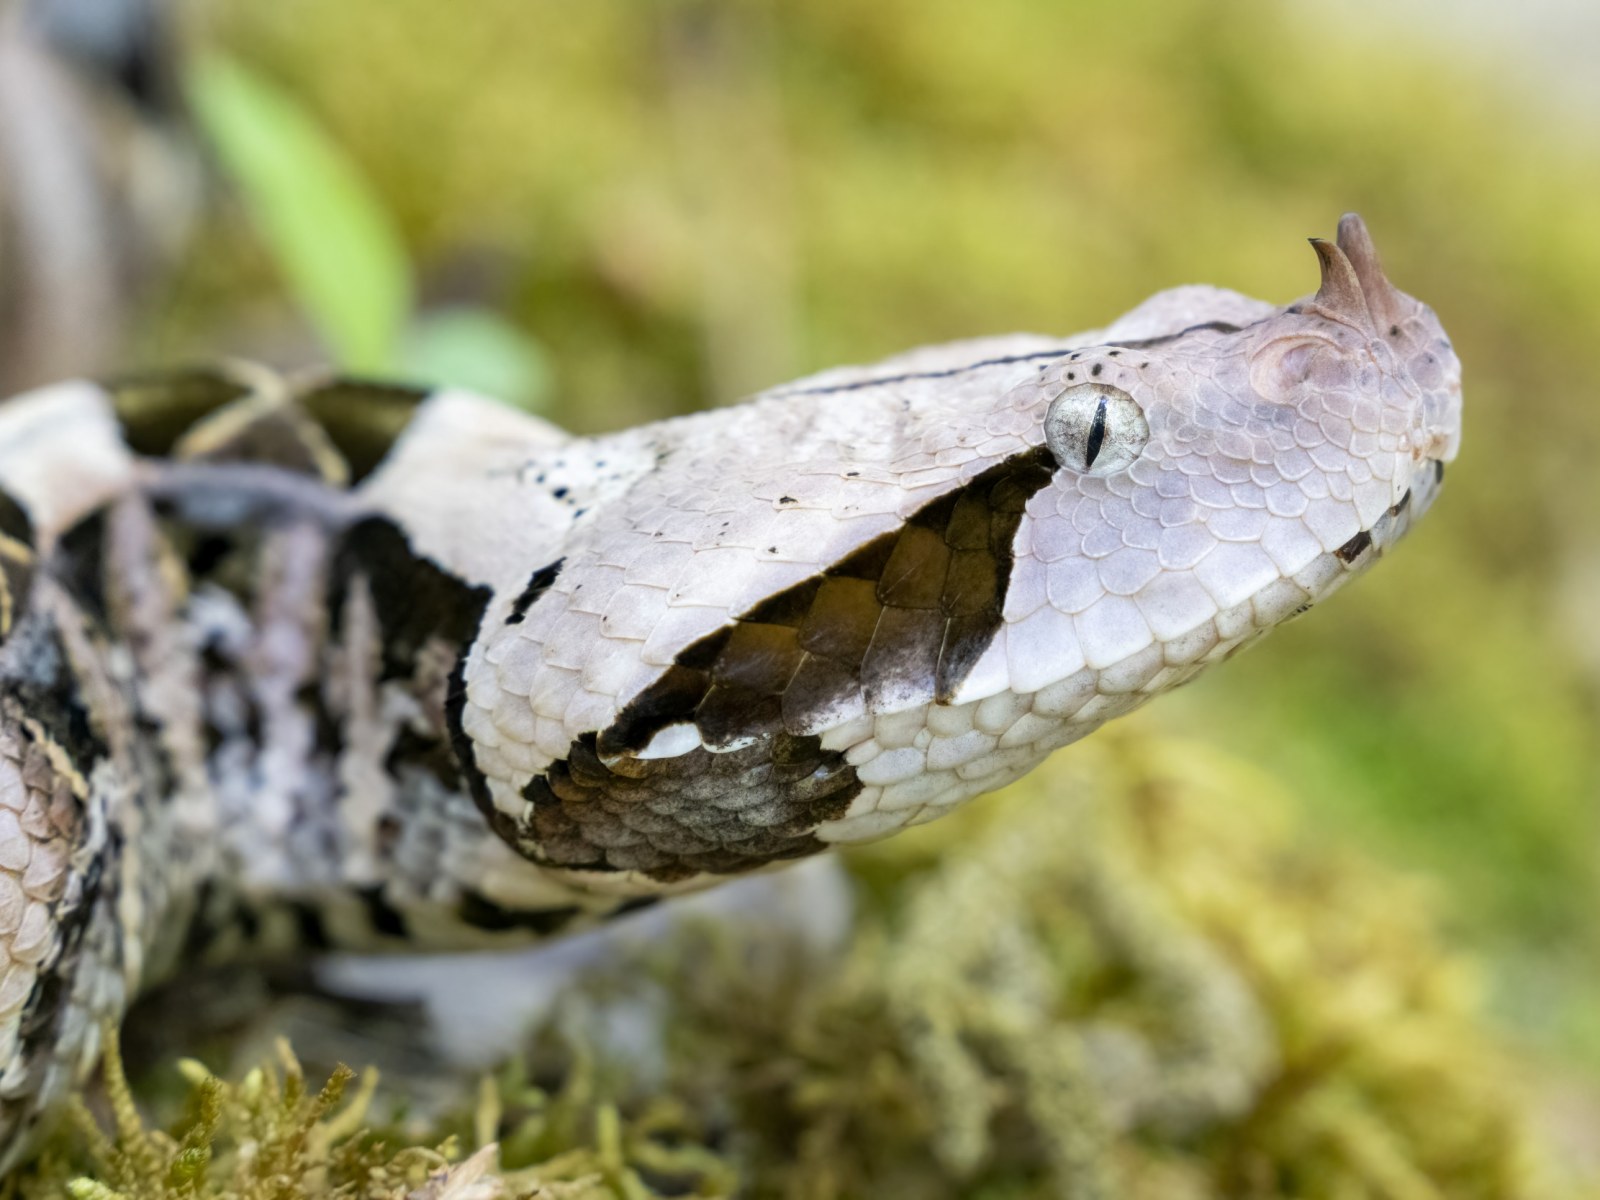 Snakes of Central and Western Africa